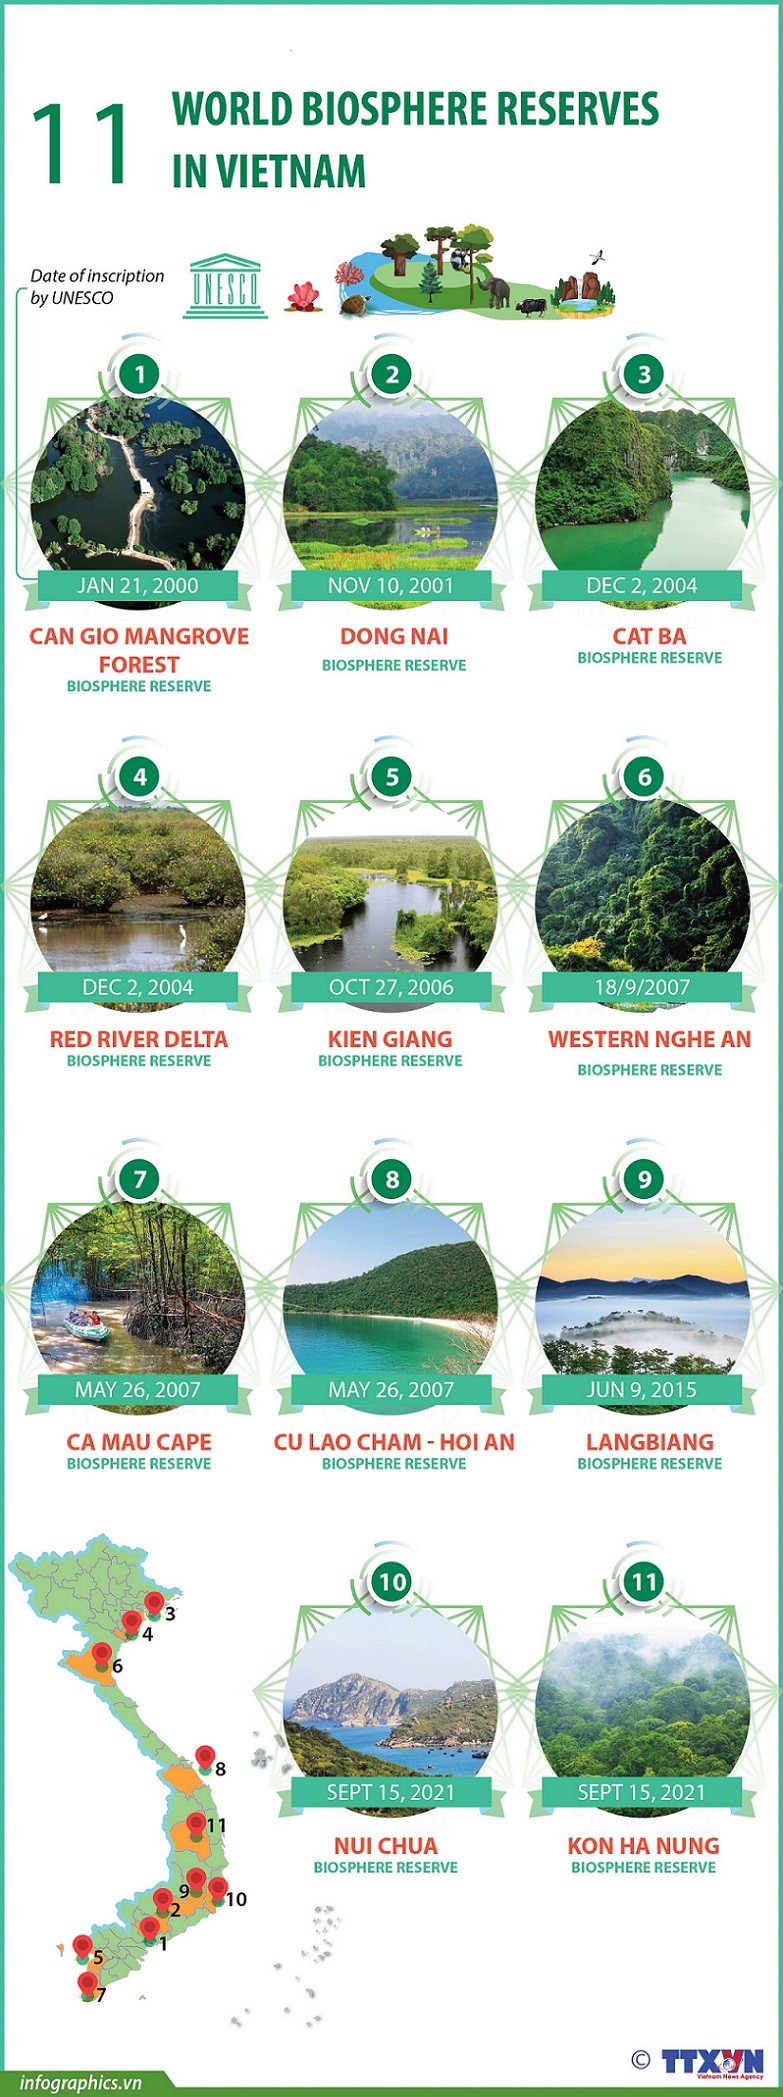 Vietnam has a system of 11 UNESCO-recognized World Biosphere Reserves